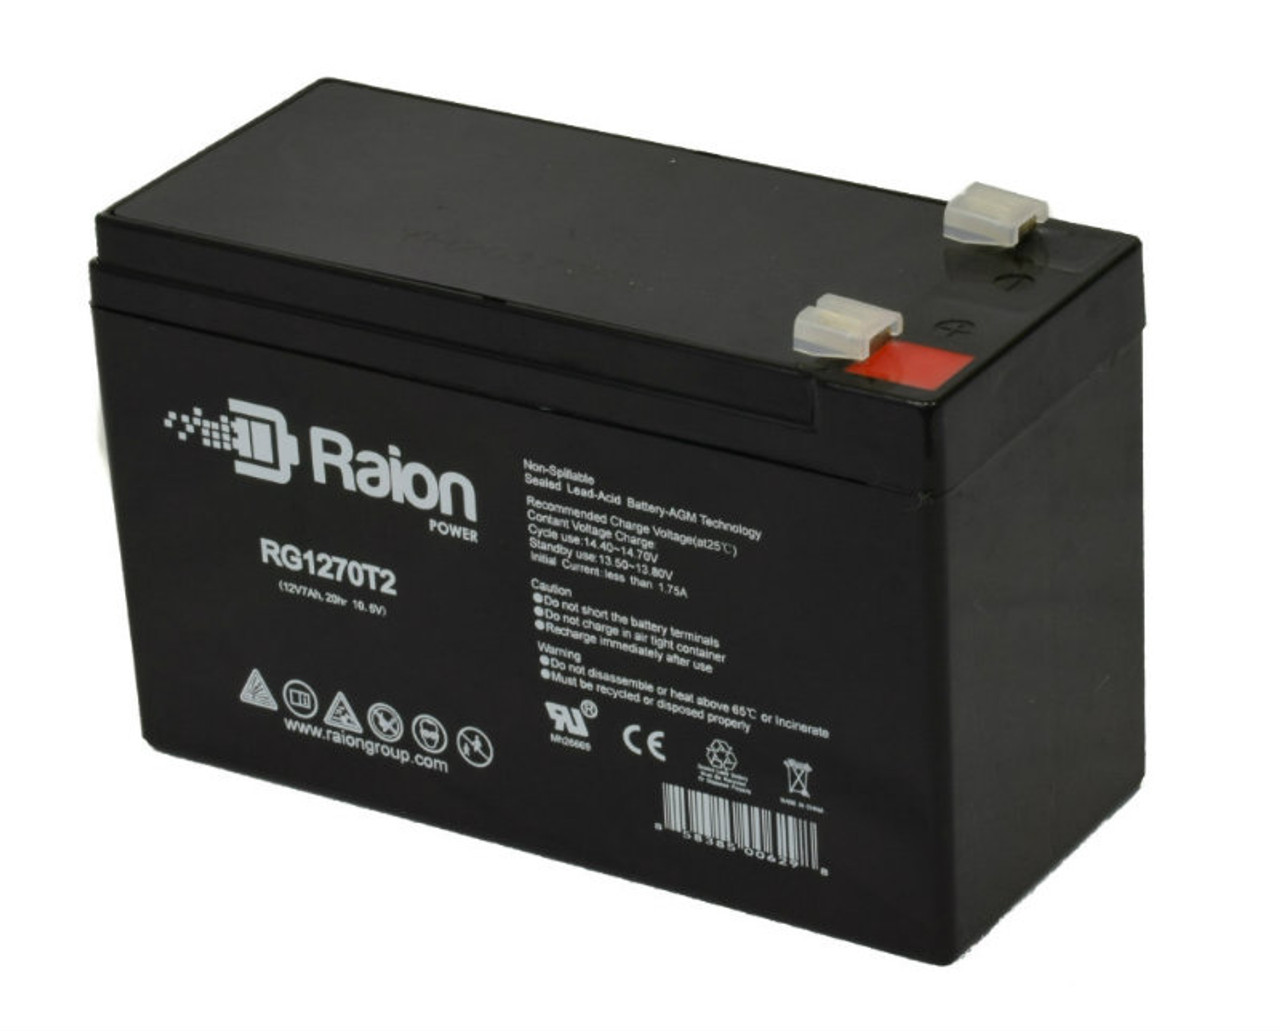 Raion Power Replacement 12V 7Ah Fire Alarm Control Panel Battery for Simplex 2081-9272 - 1 Pack